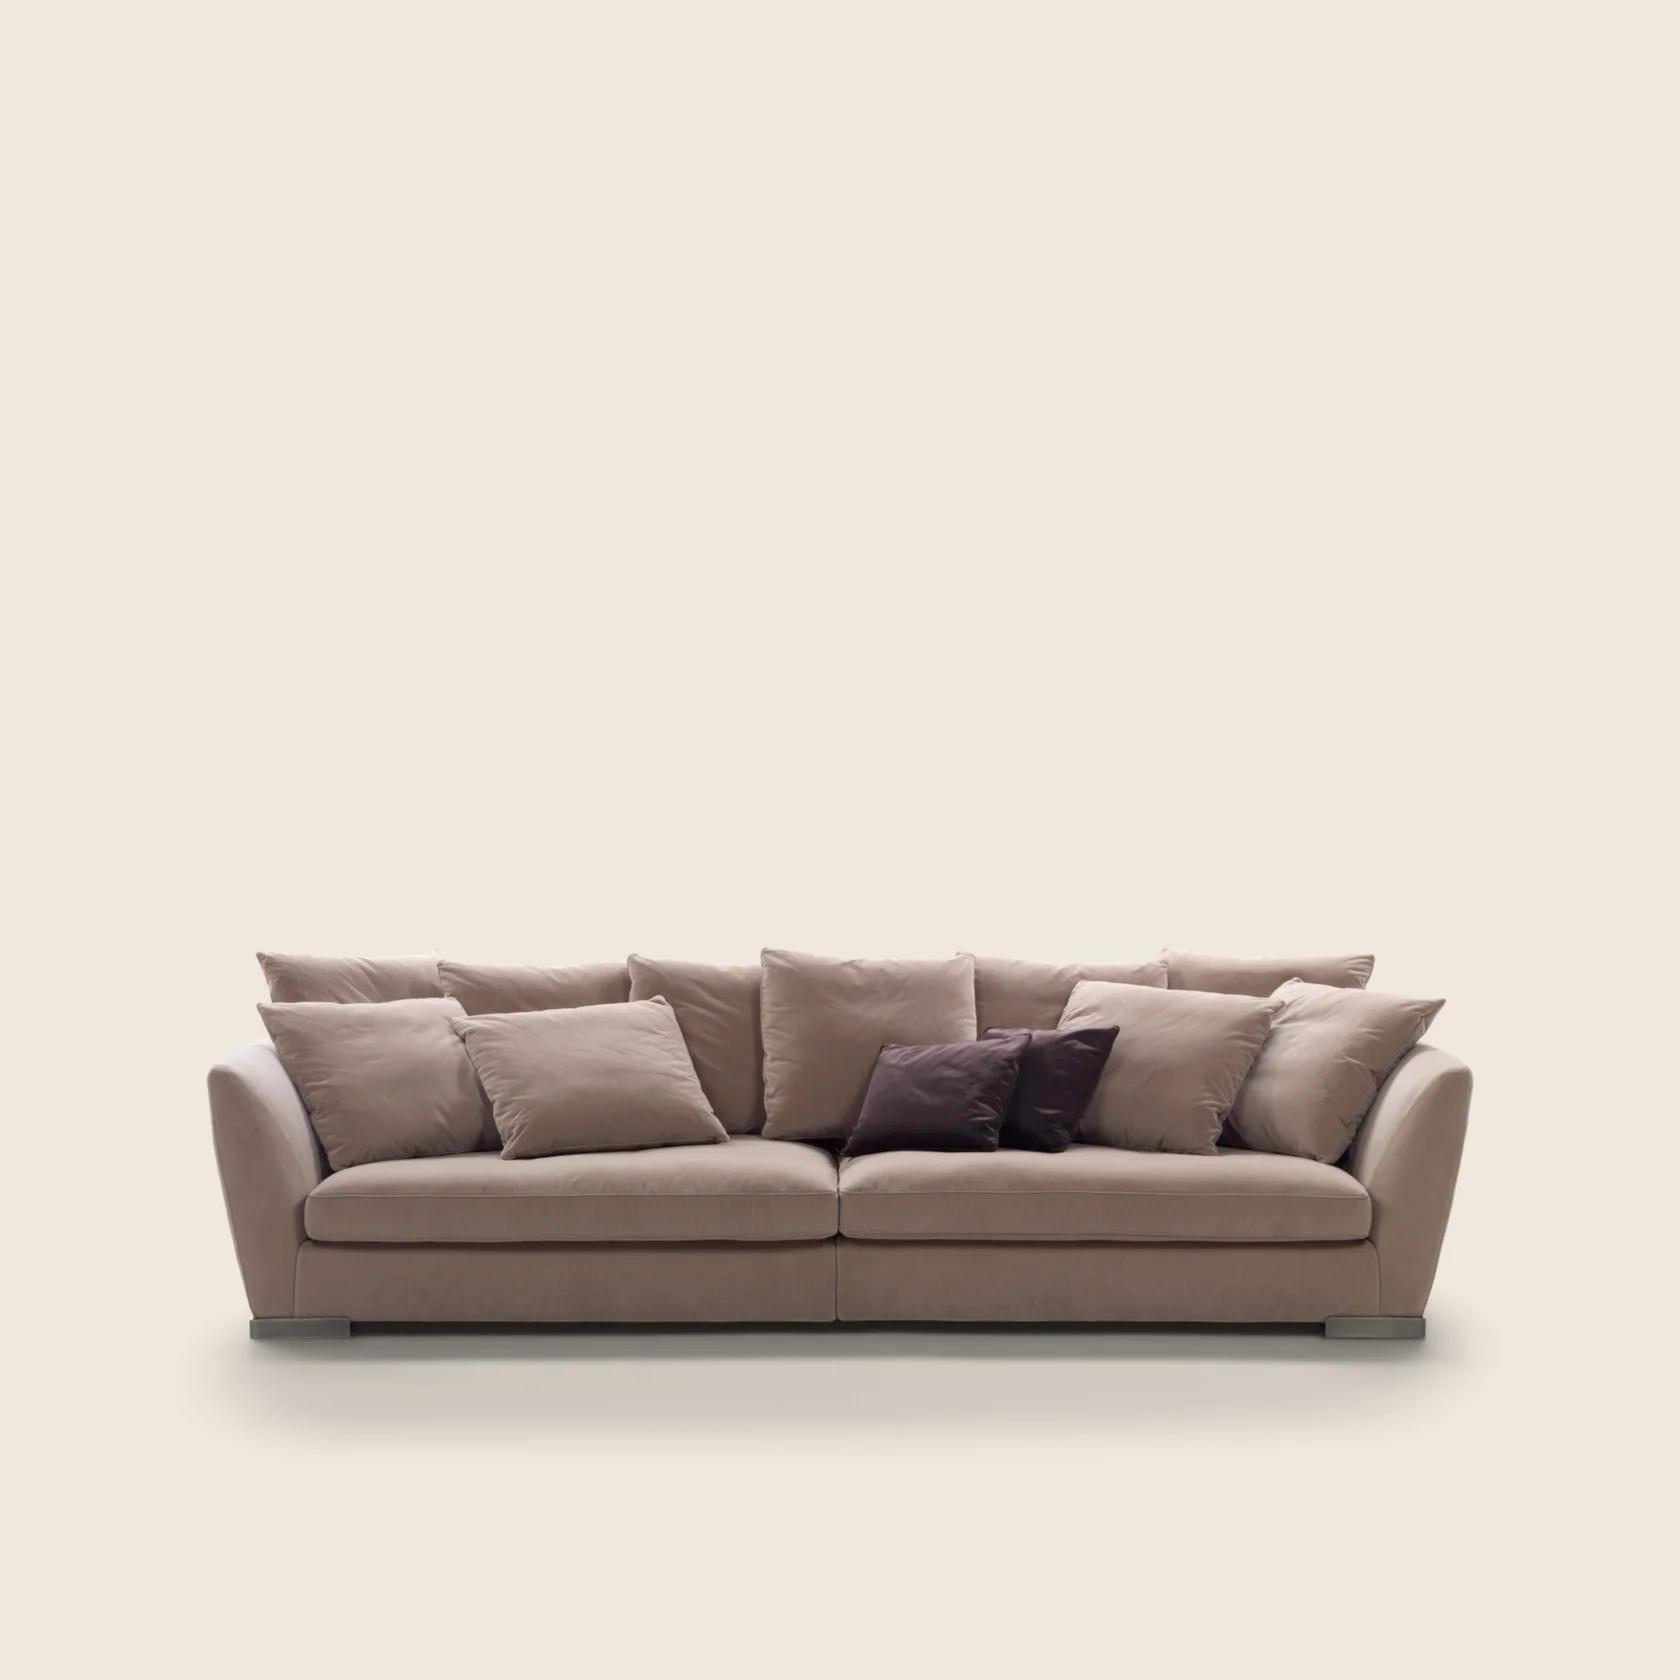 01M703_GINEVRA_SECTIONAL_01.png